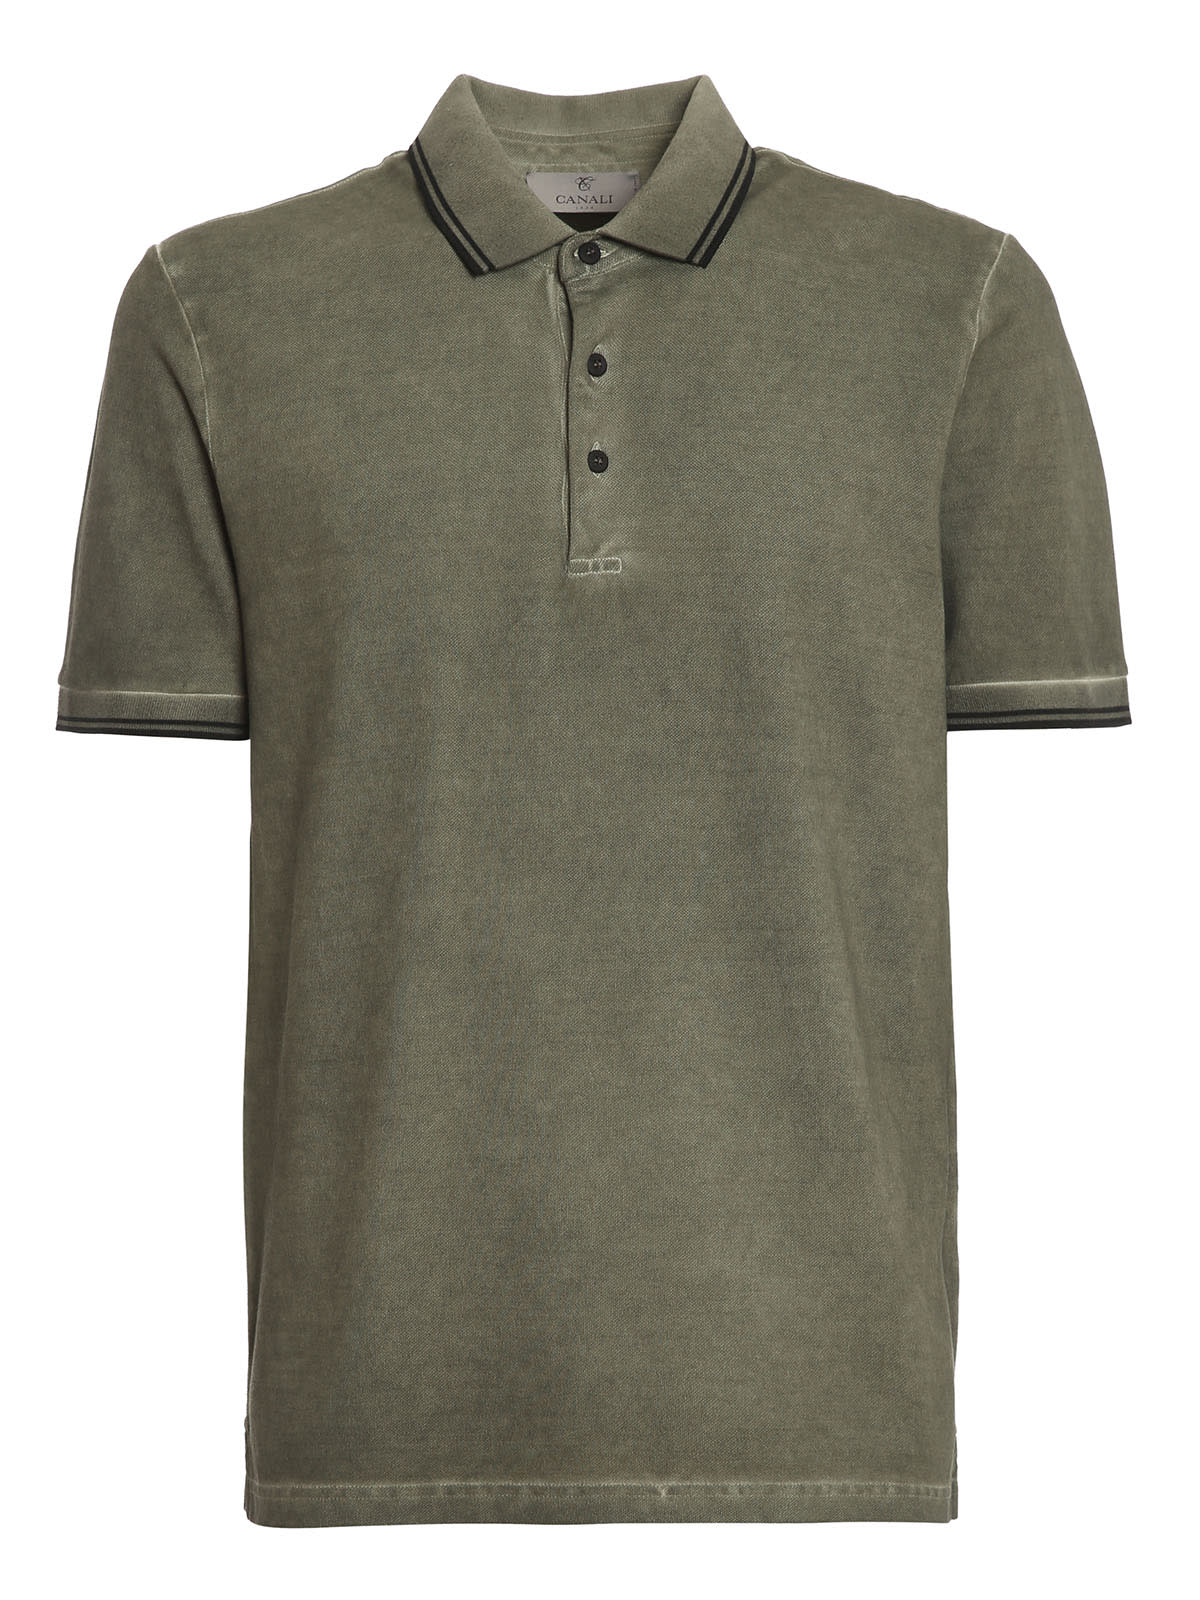 CANALI POLO JERSEY,MY01200.T0672 811 GREEN